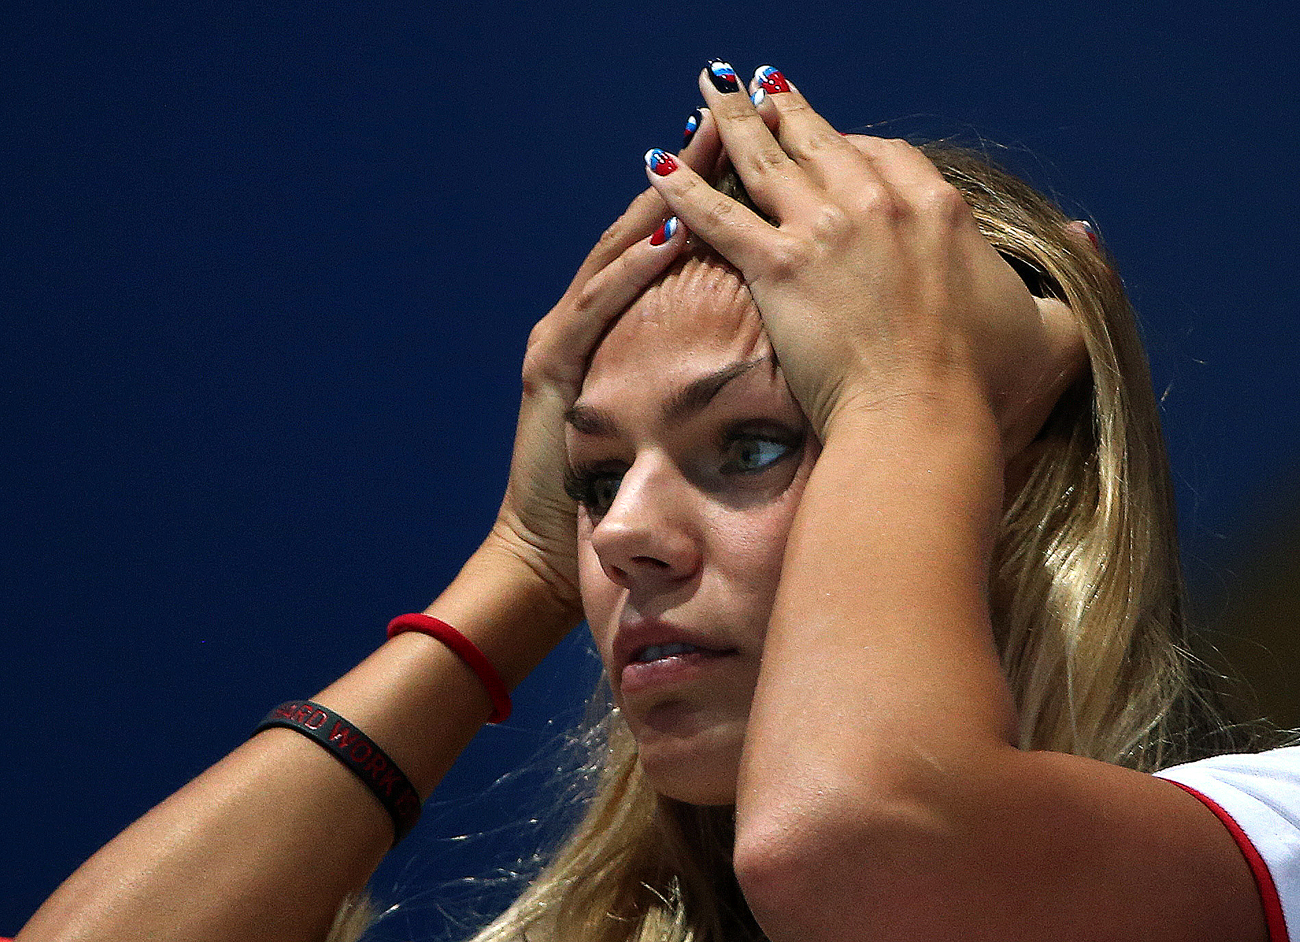 Russia's swimmer Yuliya Efimova may appeal her ban to the Court of Arbitration for Sport.